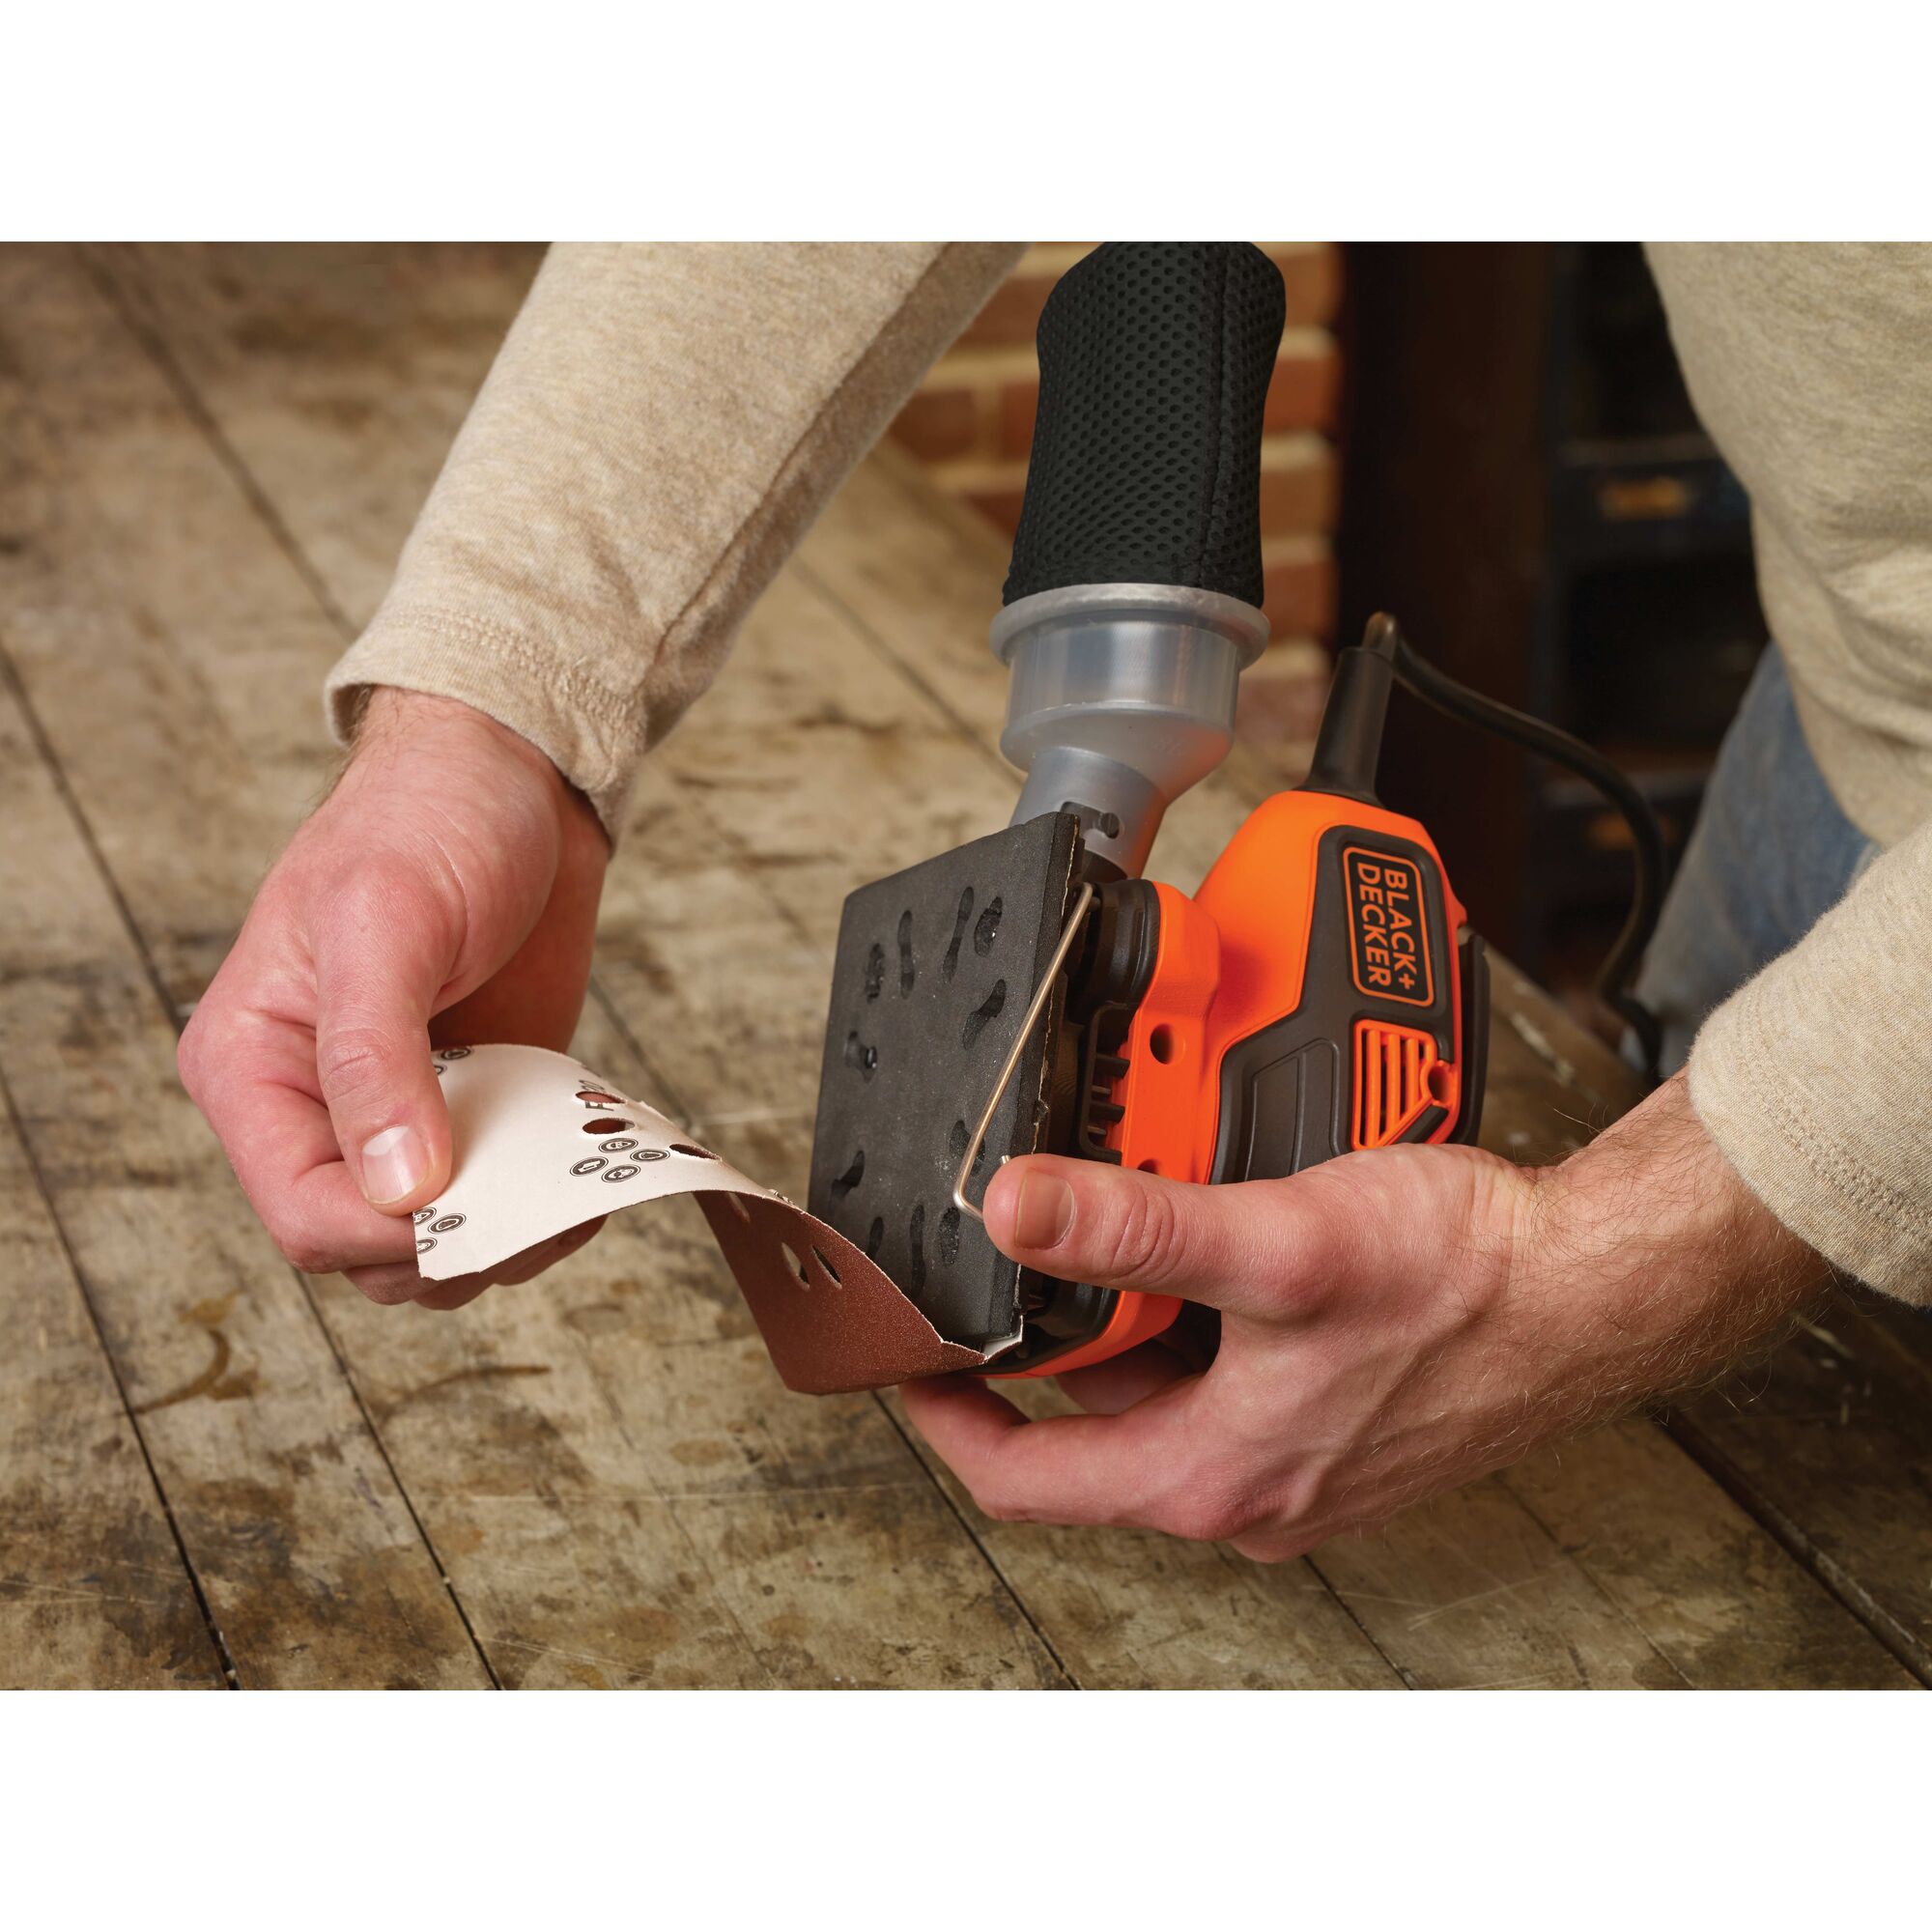 Changeable sandpaper feature of a quarter sheet orbital sander with paddle switch actuation.